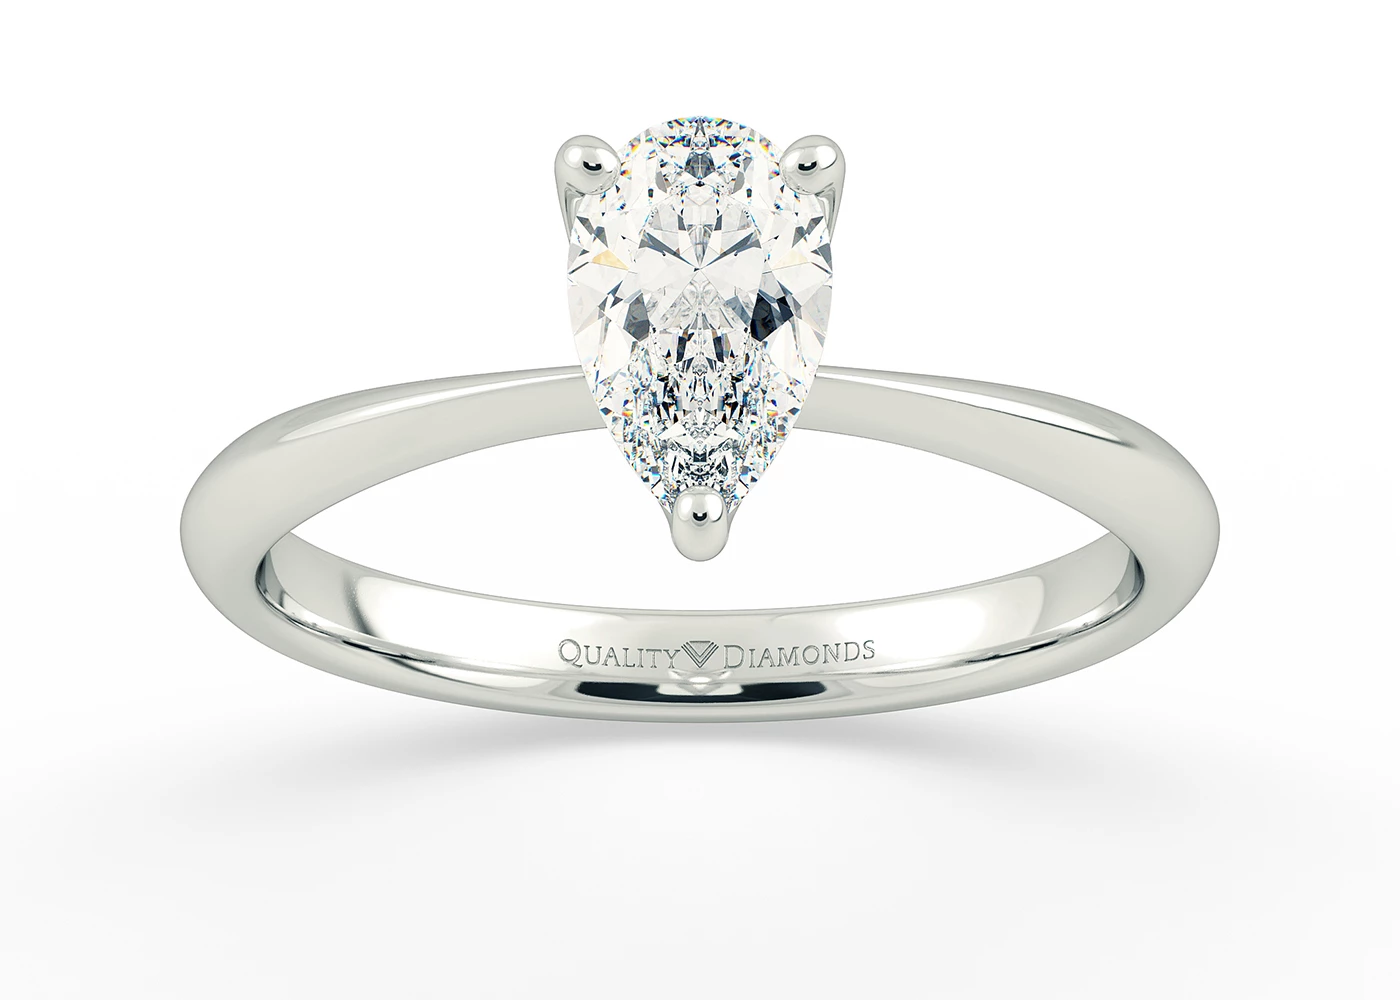 Half Carat Pear Solitaire Diamond Engagement Ring in 9K White Gold